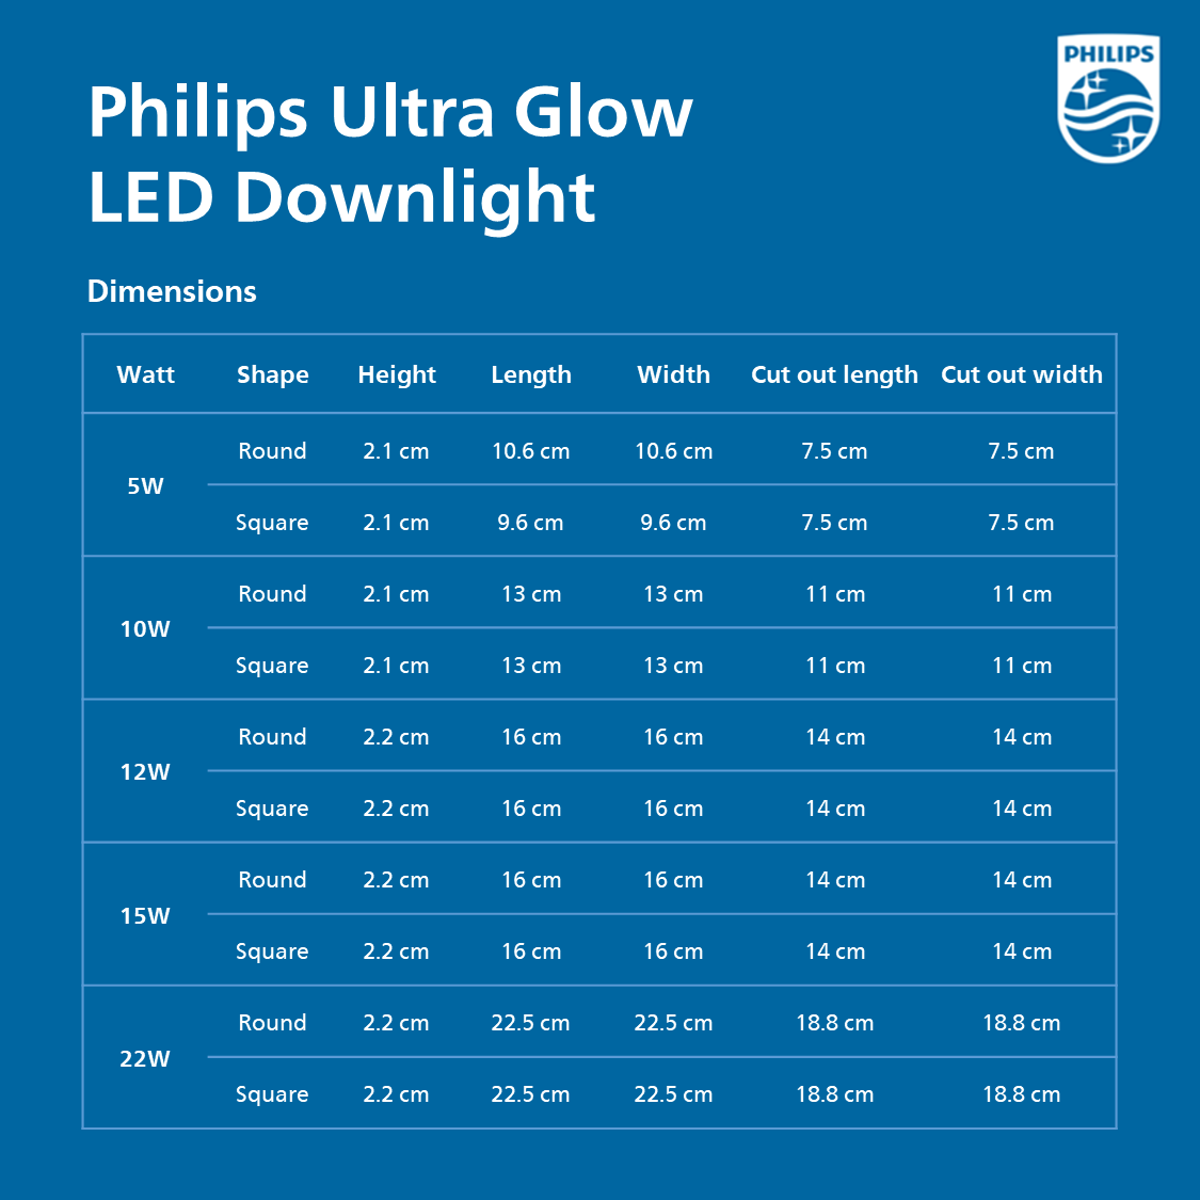 Philips Ultra Glow LED Downlight